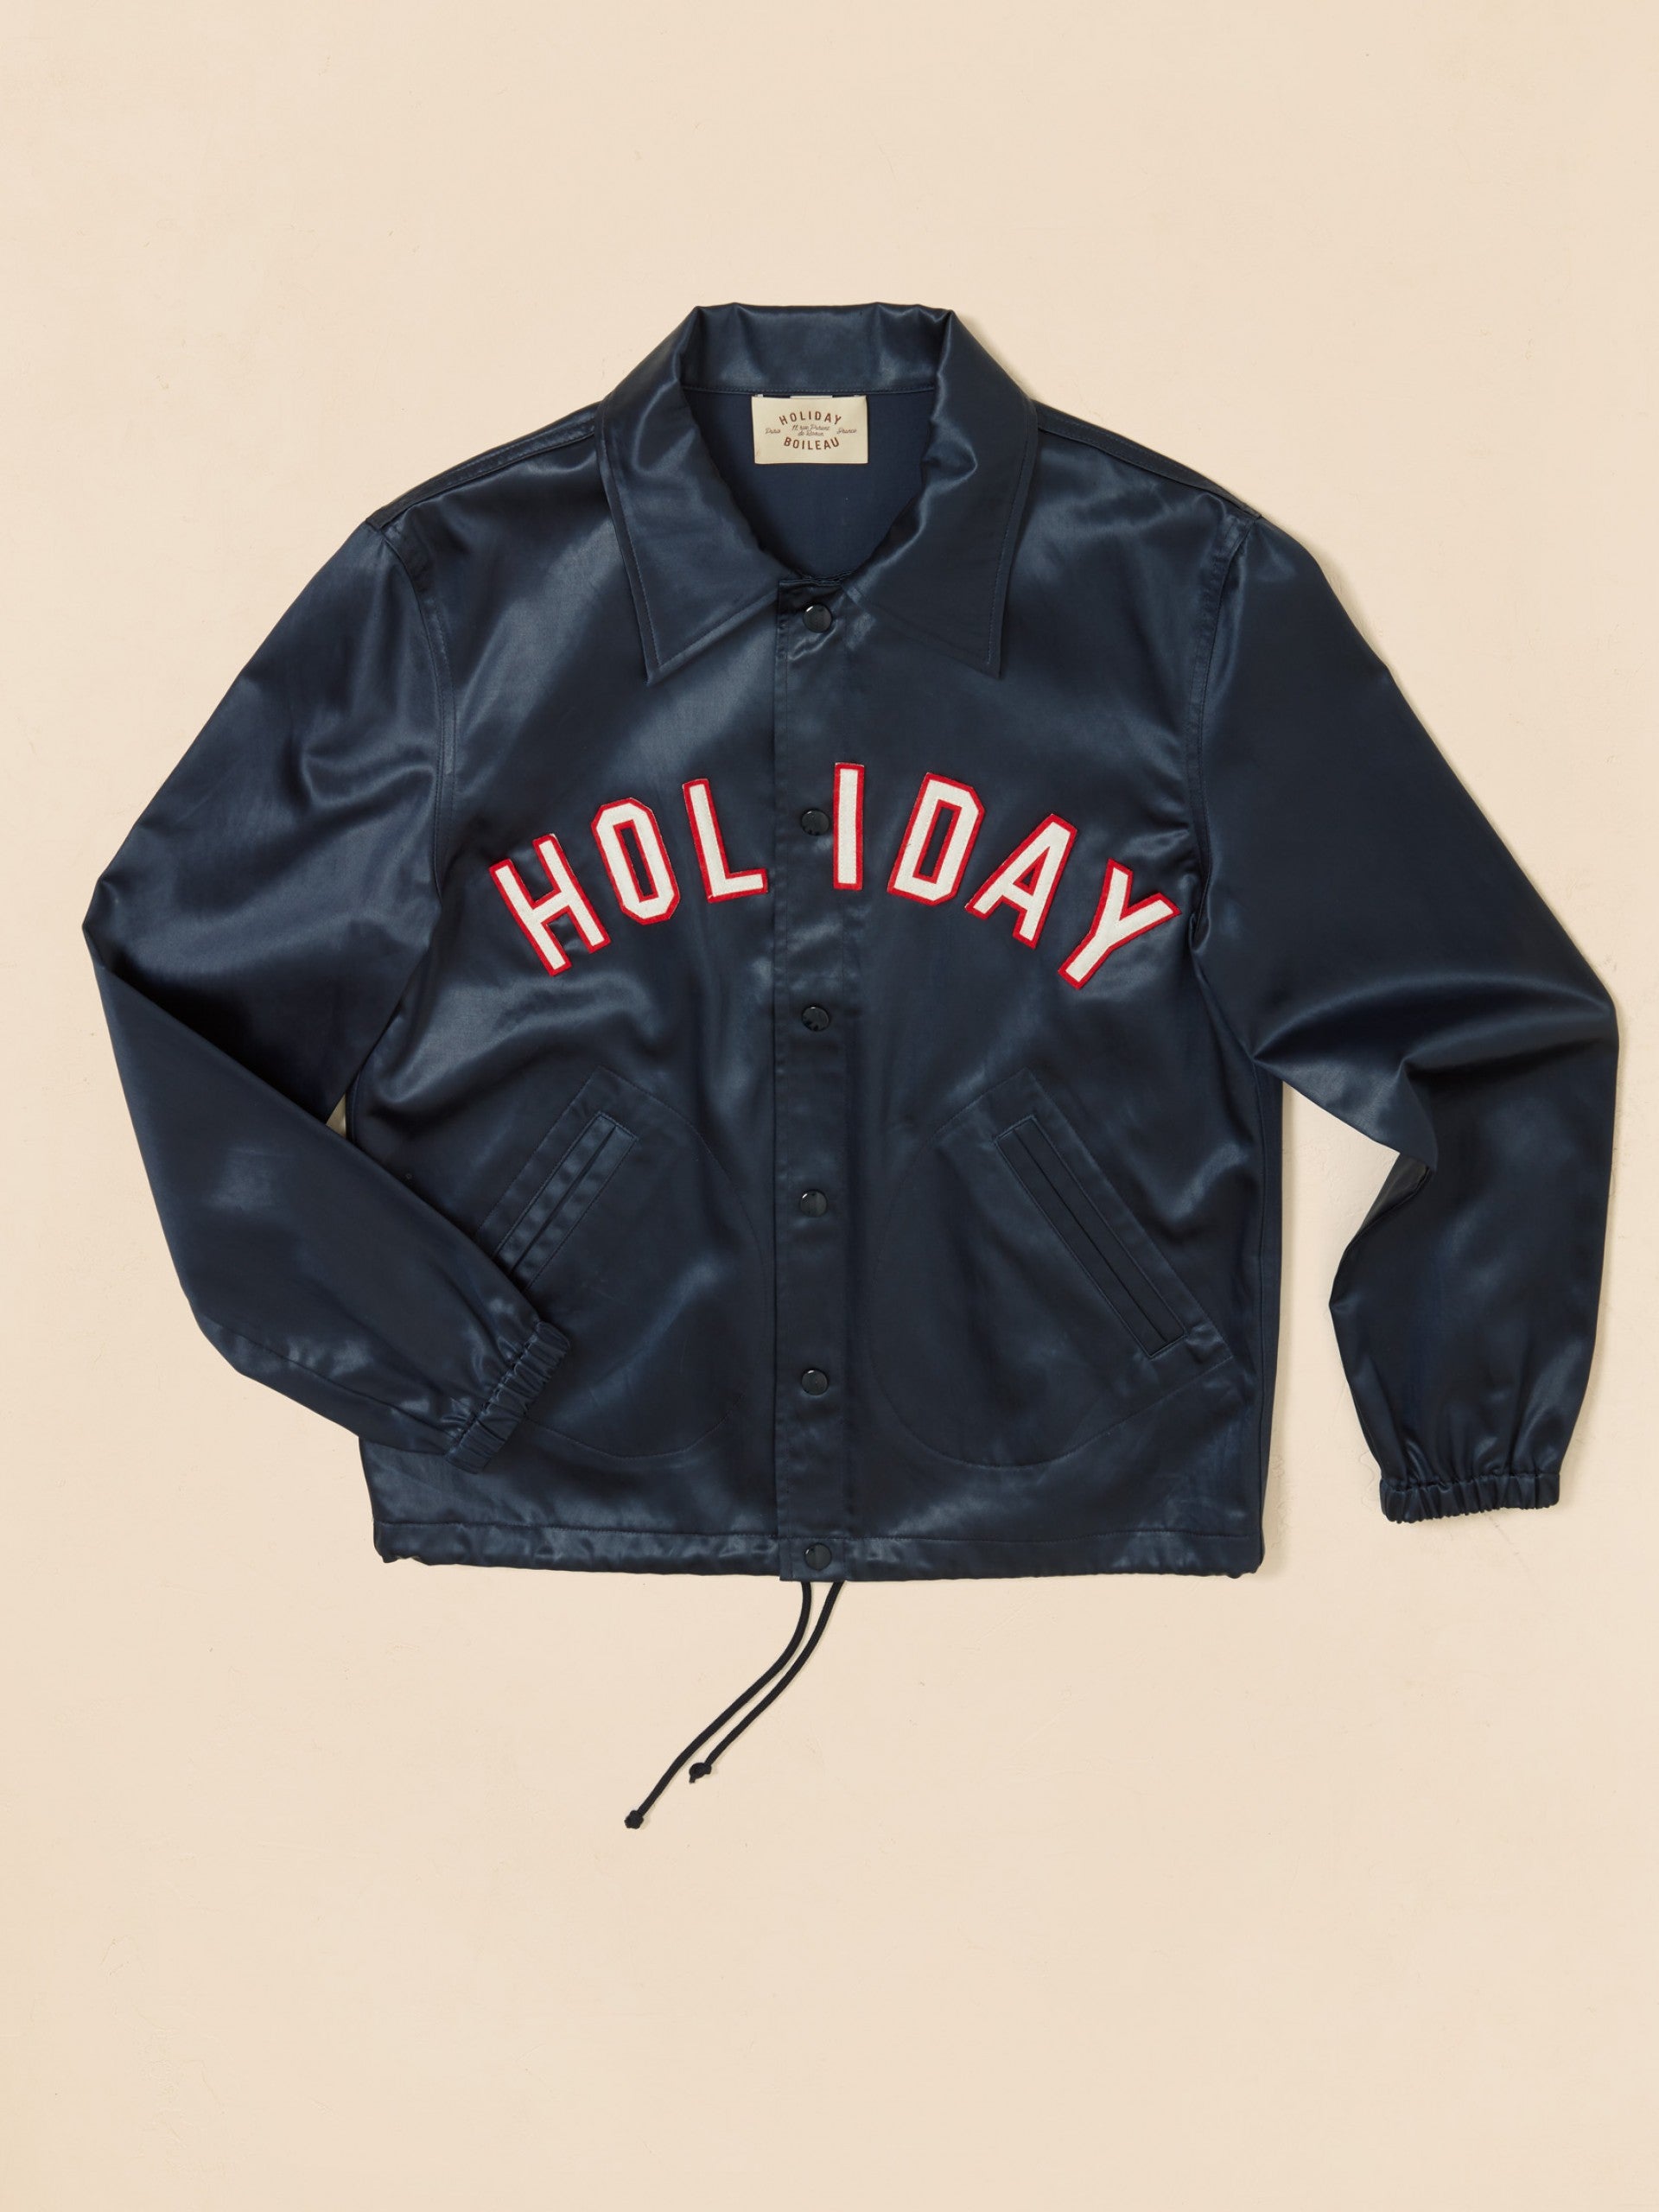 20.holiday boileau the starter jacket